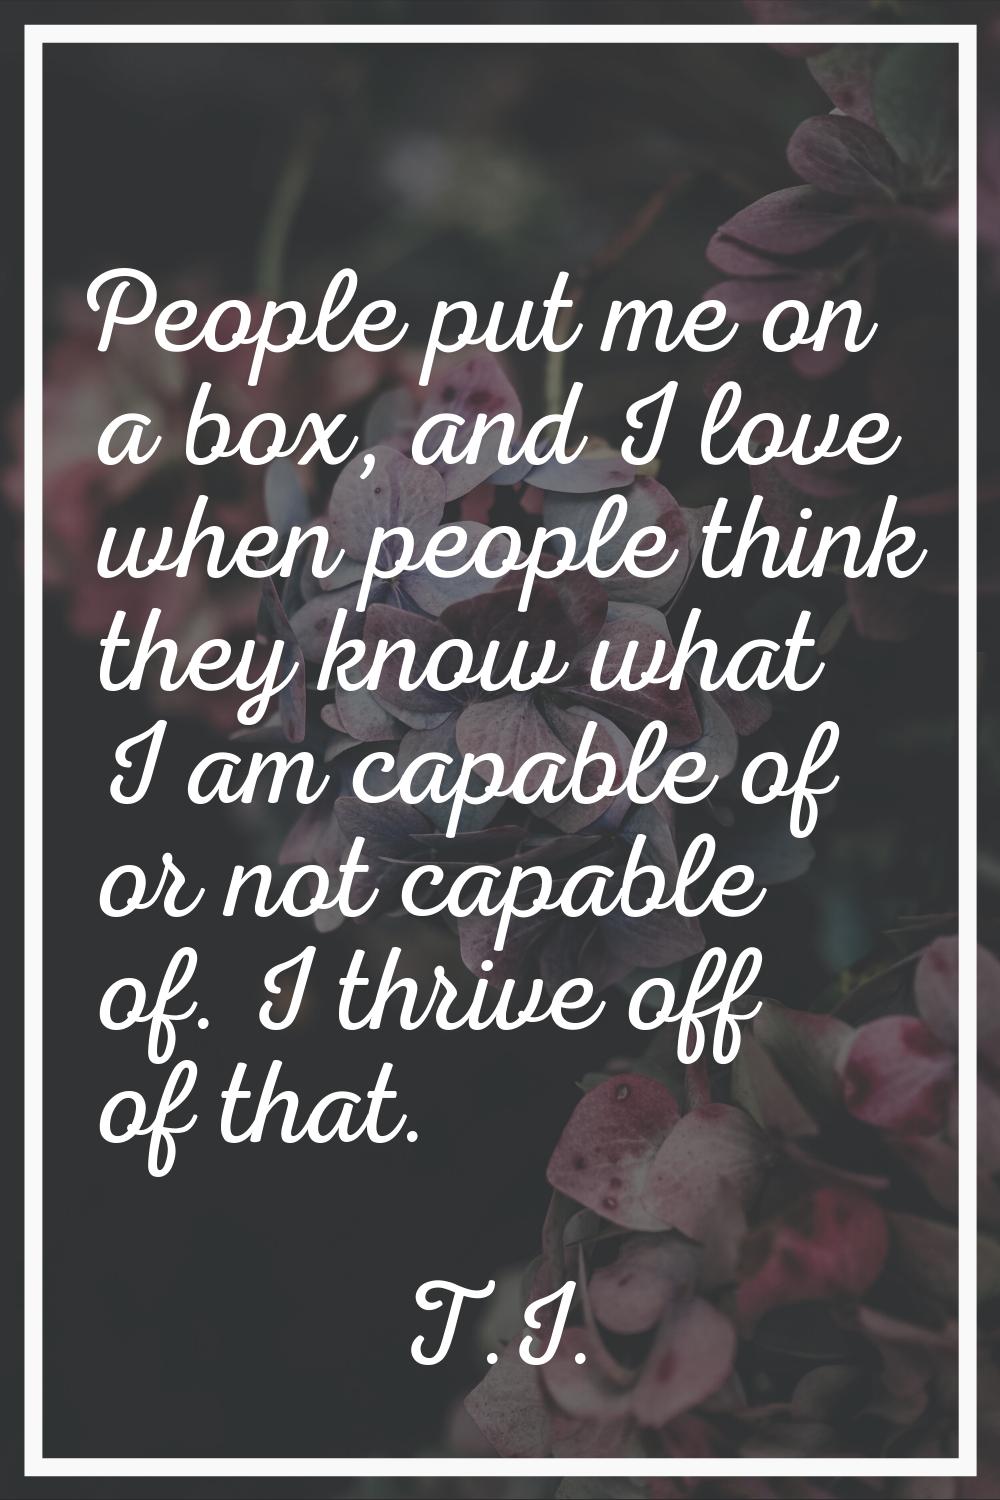 People put me on a box, and I love when people think they know what I am capable of or not capable 